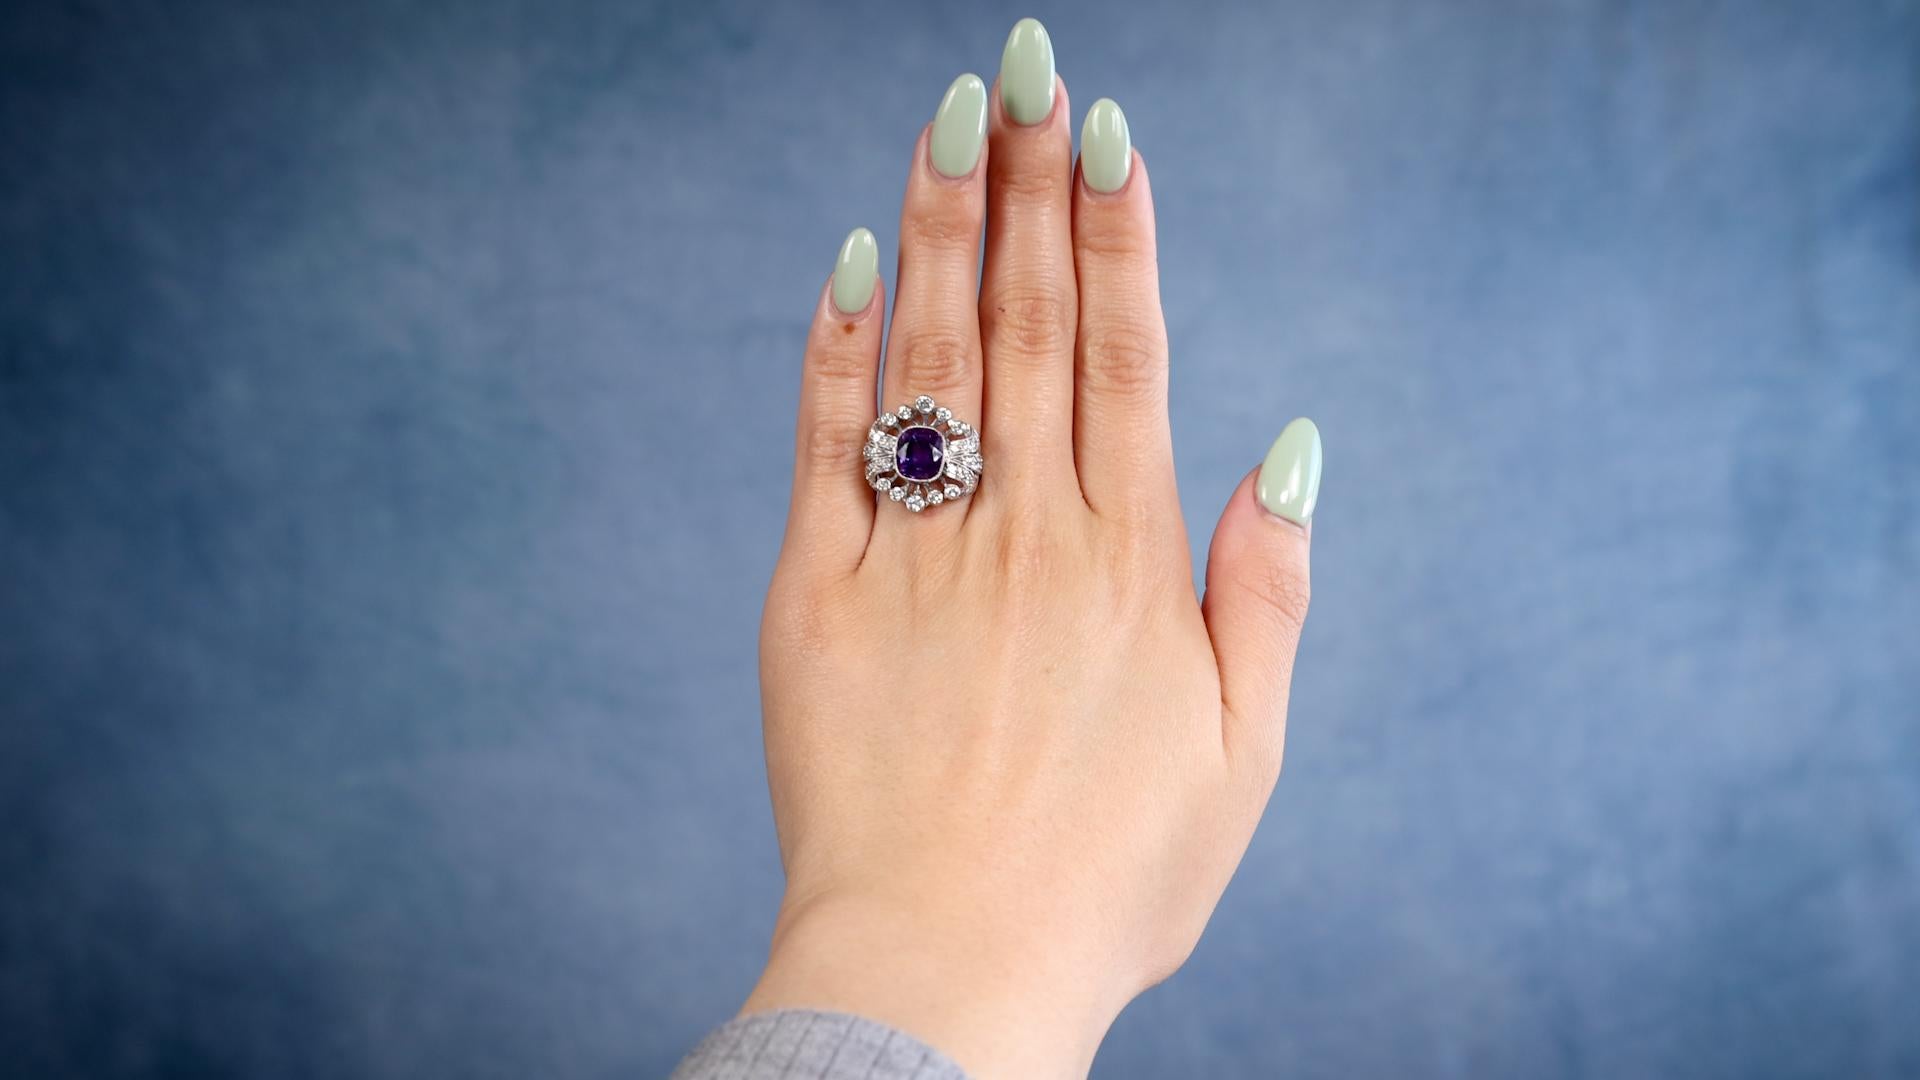 One Edwardian Revival Amethyst Diamond Platinum Ring. Featuring one cushion cut amethyst weighing approximately 2.20 carats. Accented by 32 round brilliant cut diamonds with a total weight of approximately 0.40 carat, graded near-colorless, SI